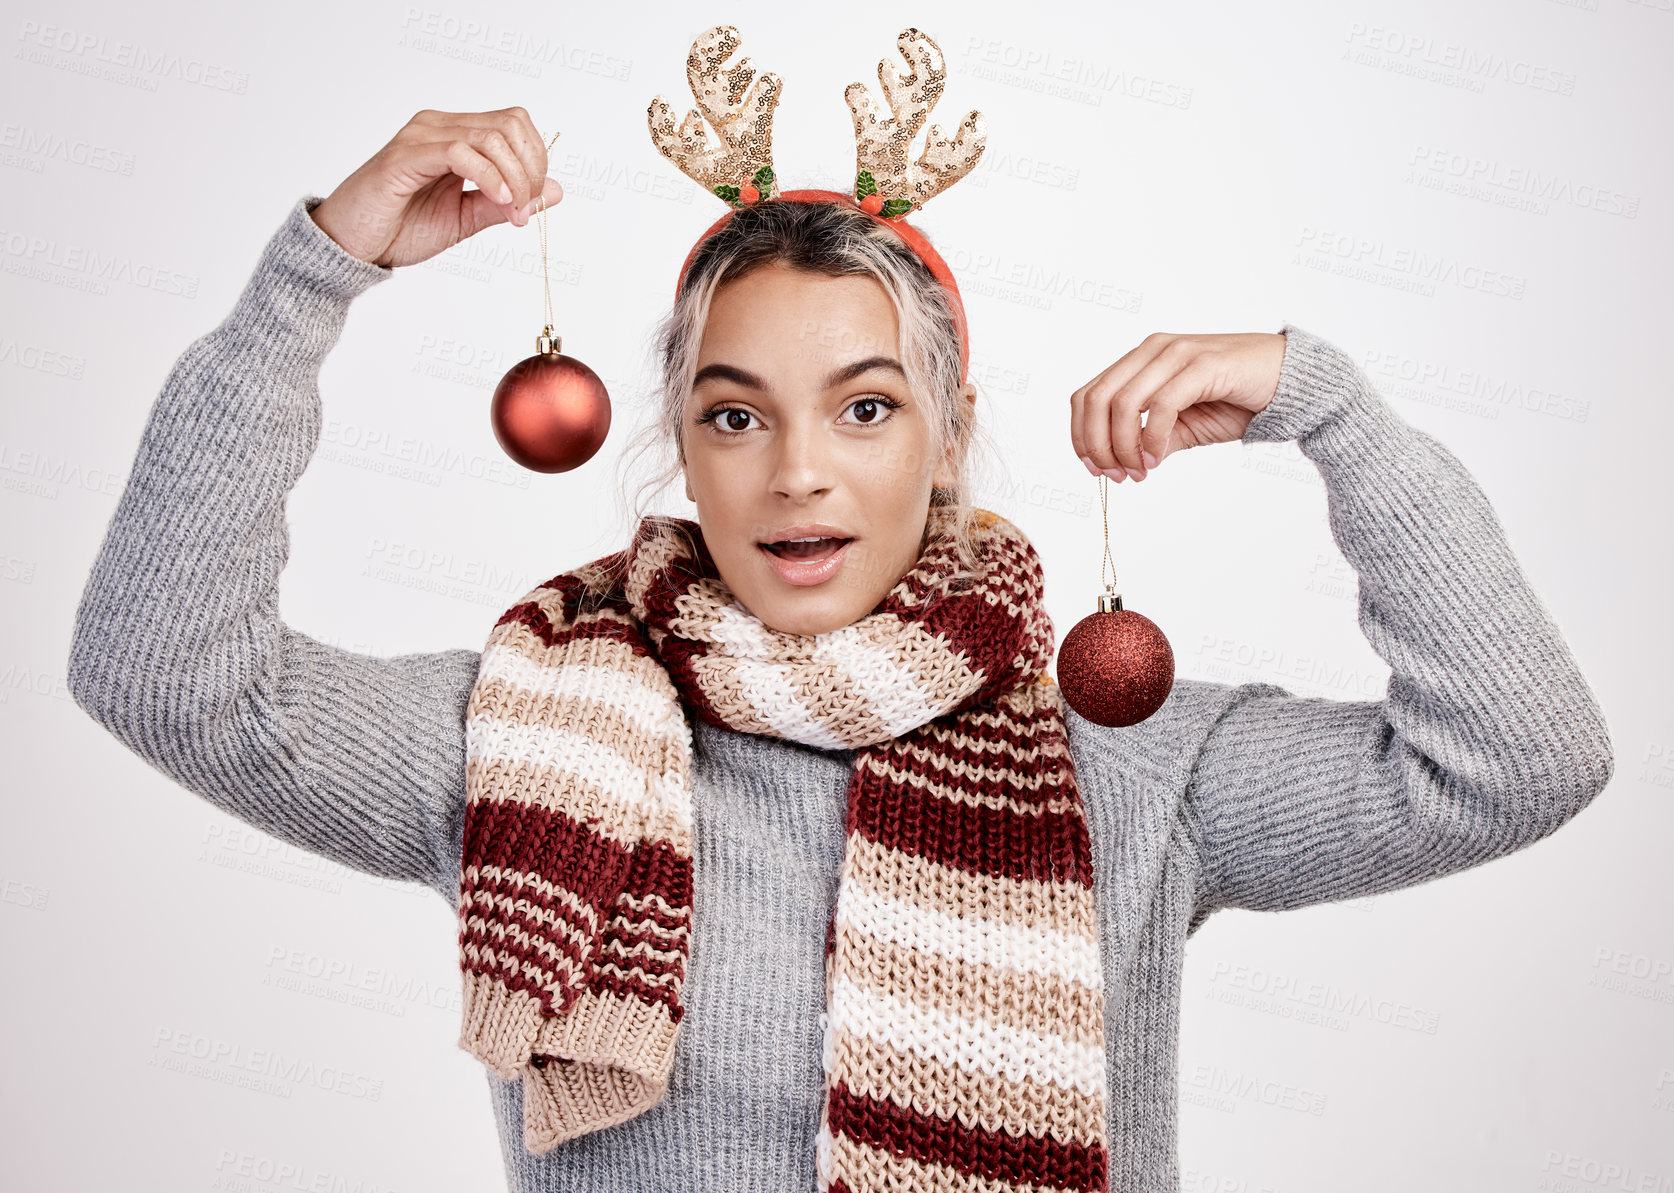 Buy stock photo Studio portrait of an attractive young woman holding up baubles while dressed in Christmas-themed attire